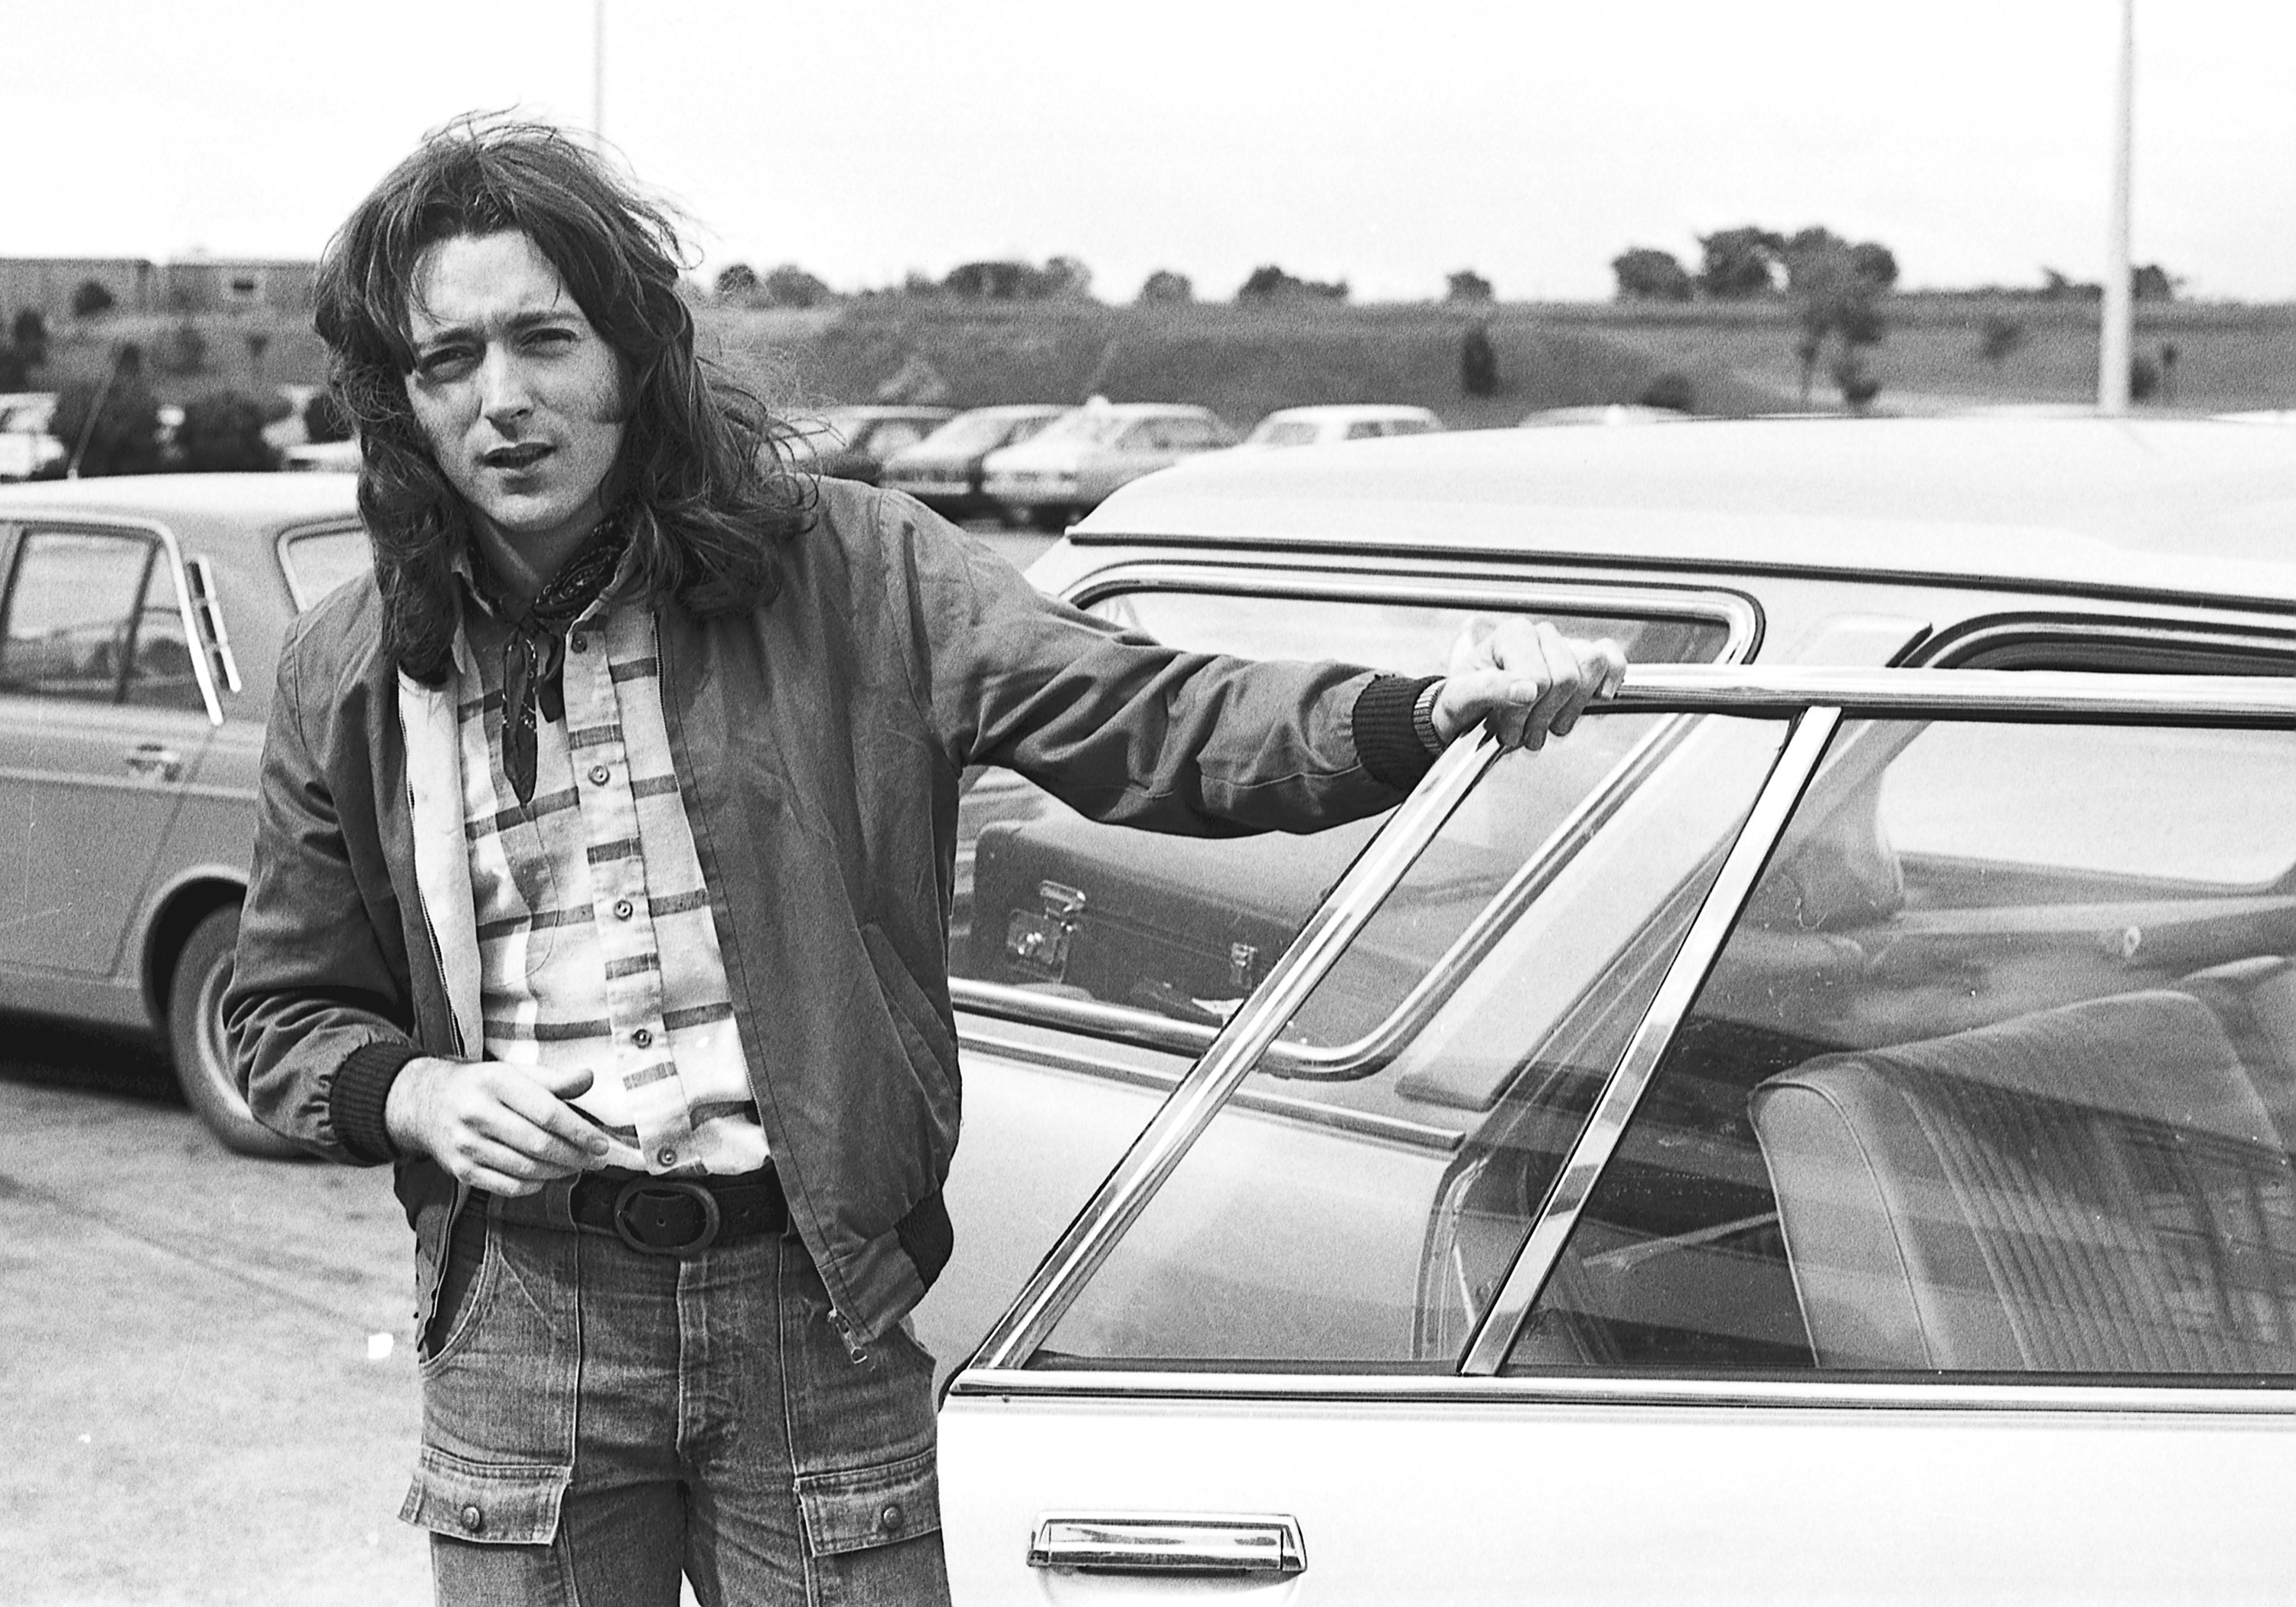 Rory-Gallagher